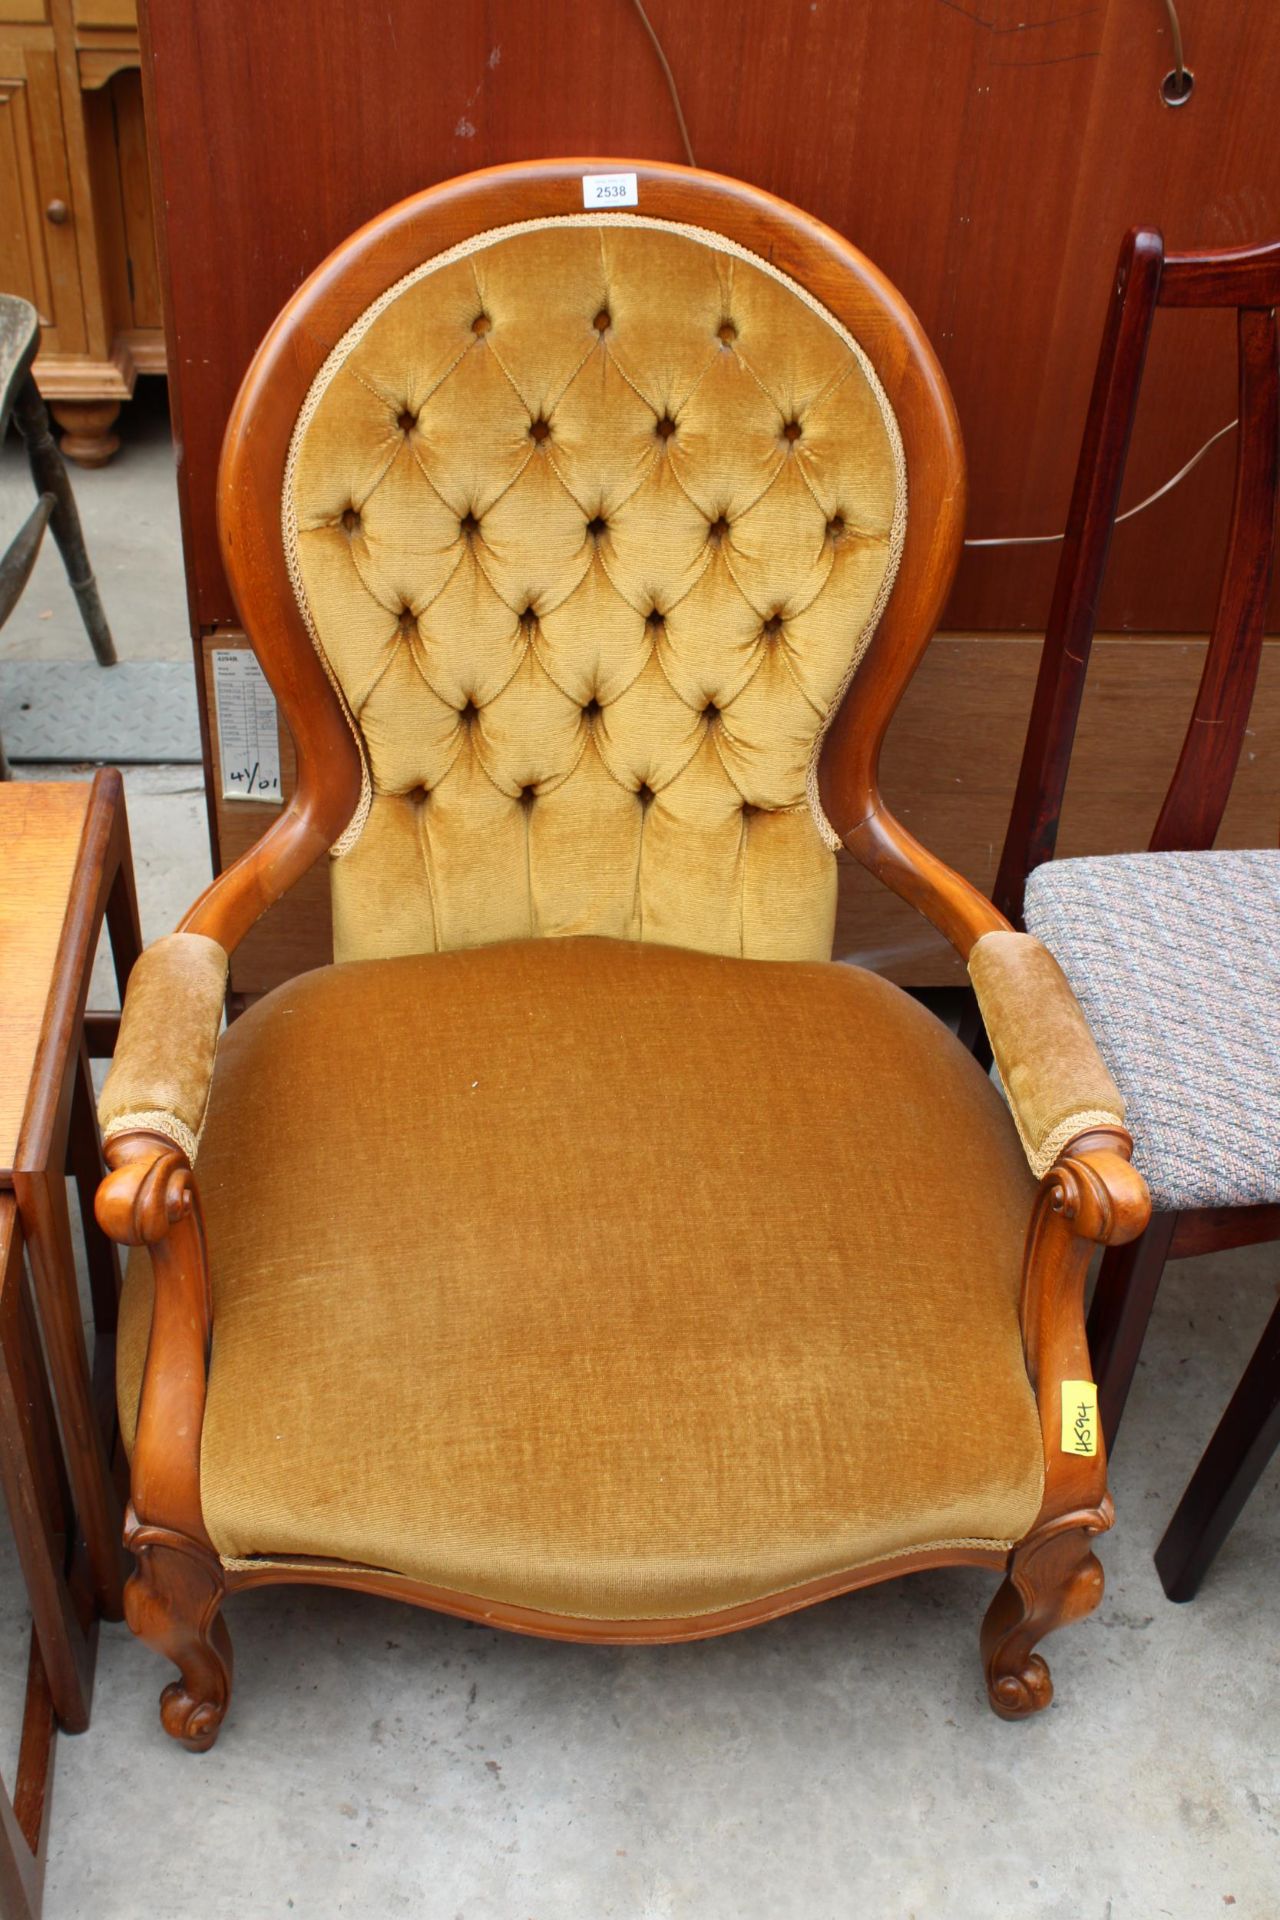 A VICTORIAN STYLE BUTTON SPOON BACK LOUNGE CHAIR WITH SWEPT OPEN ARMS